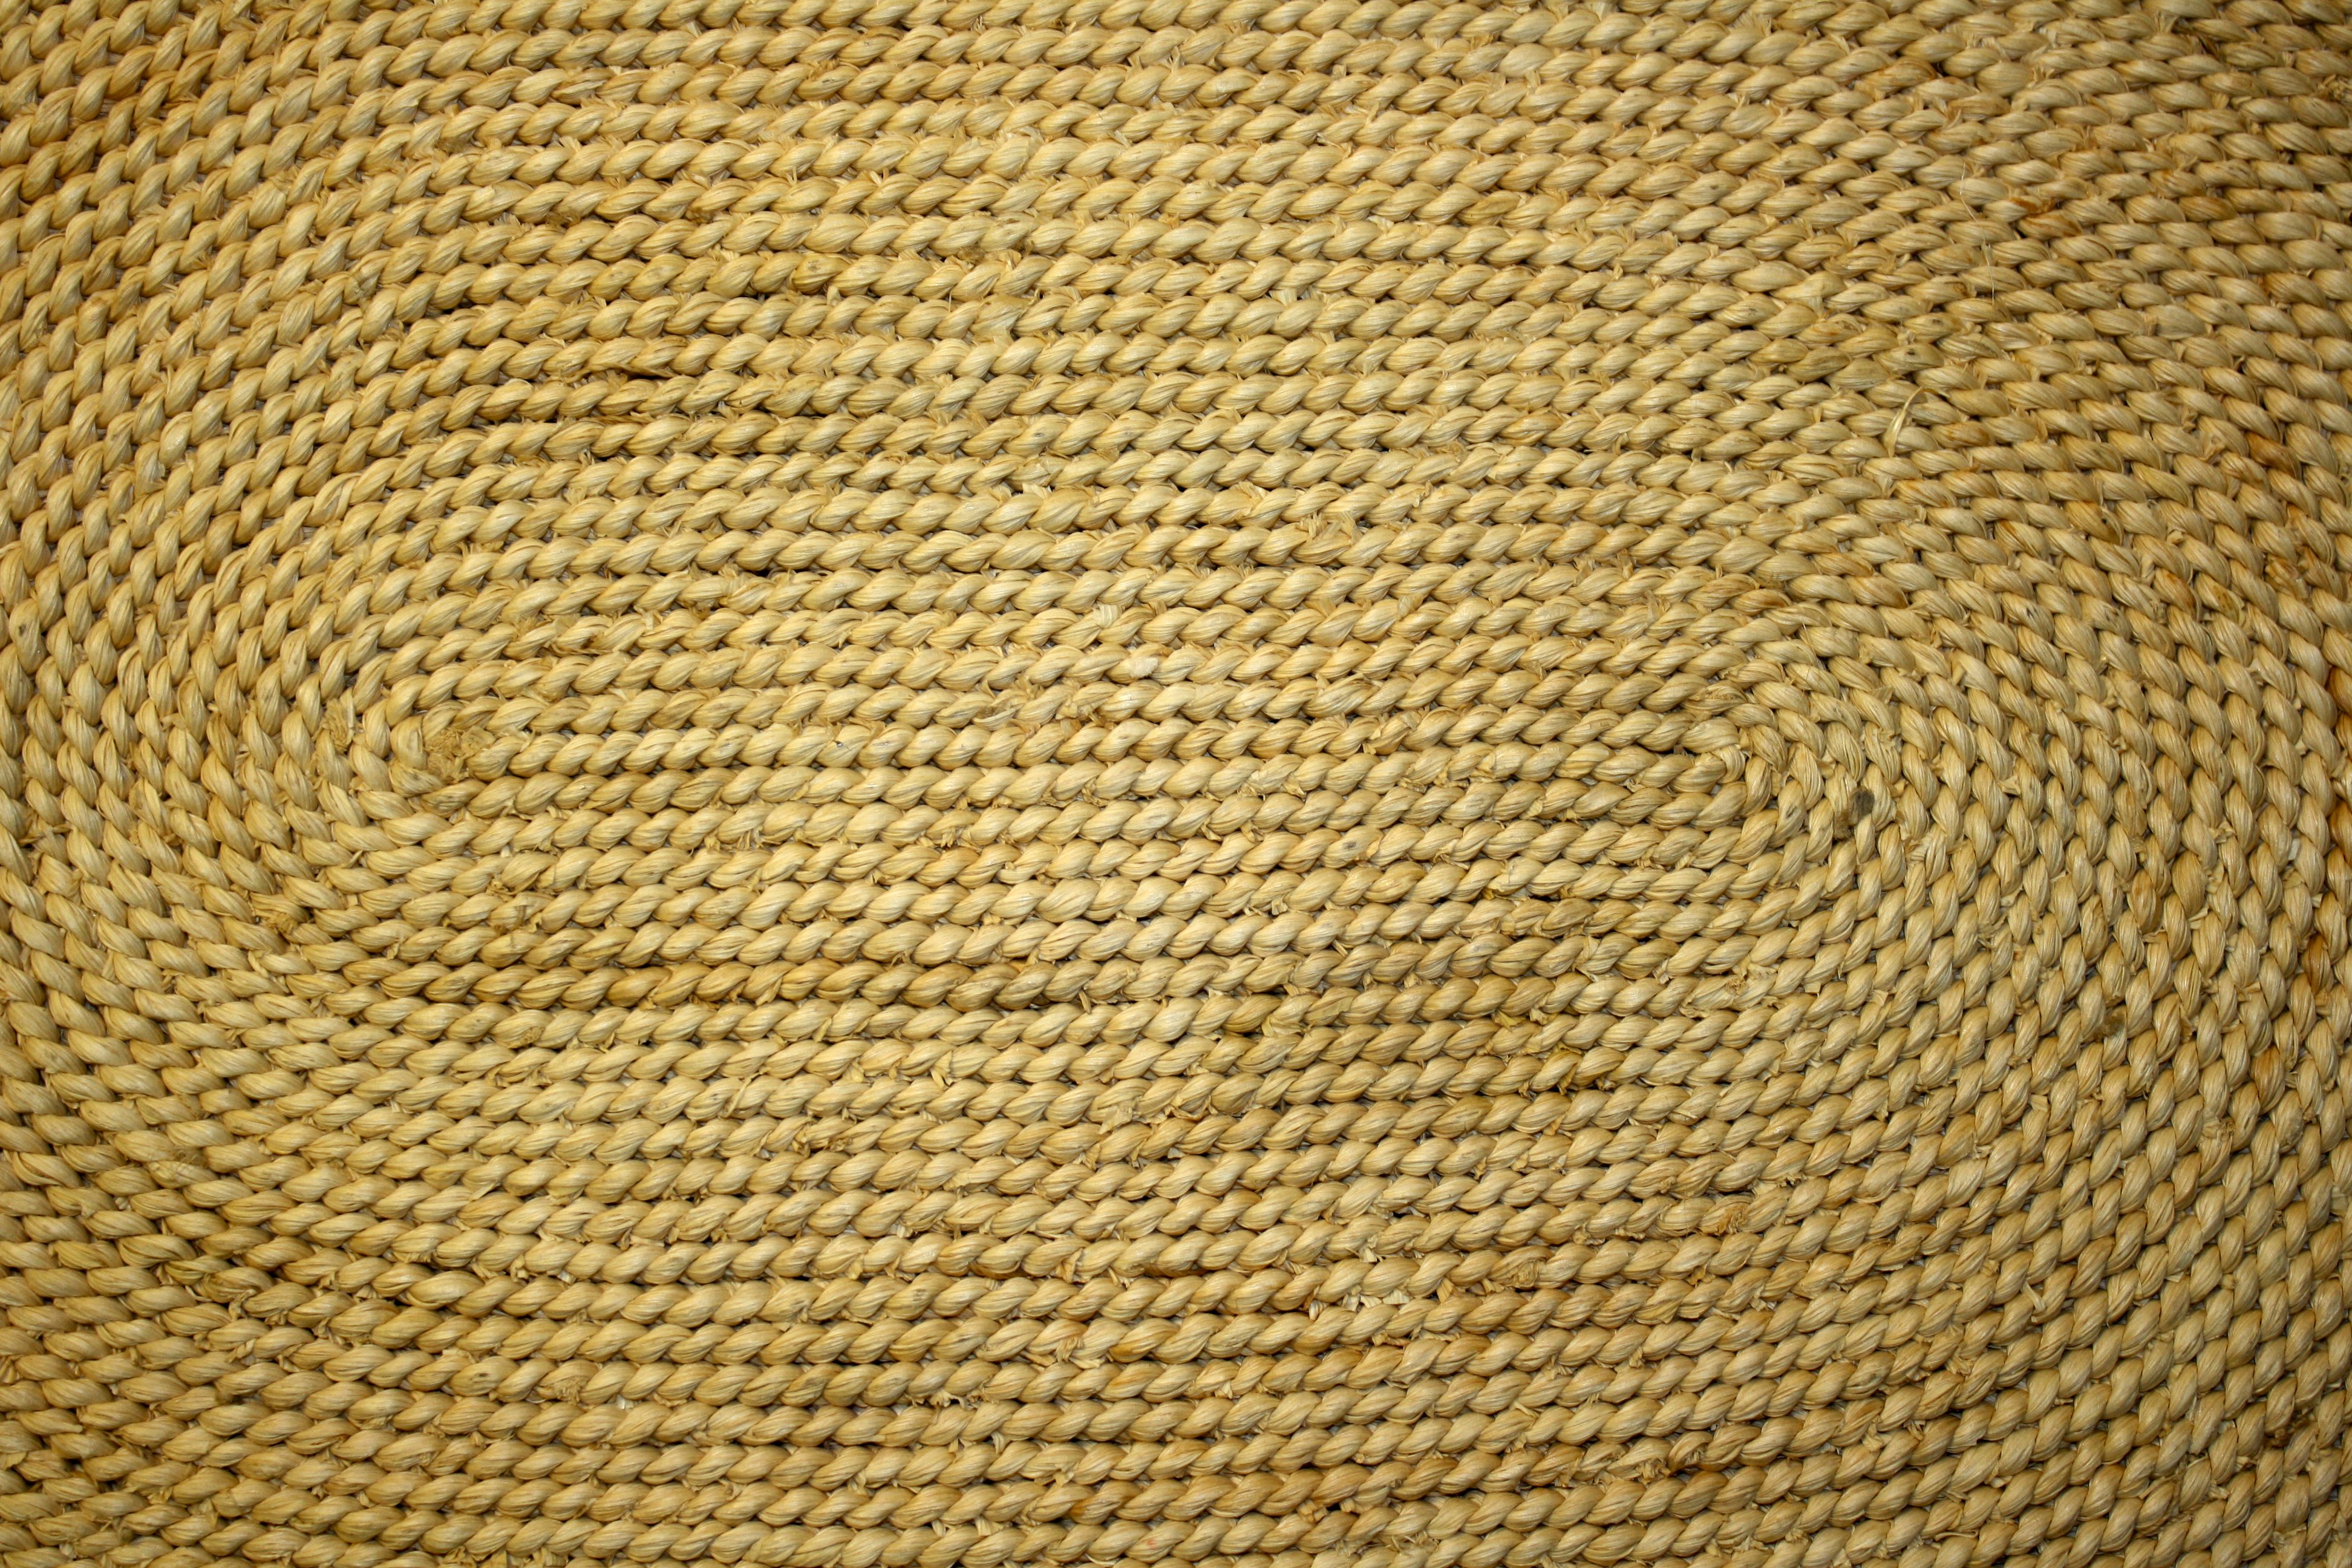 Woven Straw Placemat Texture Picture | Free Photograph | Photos Public ...